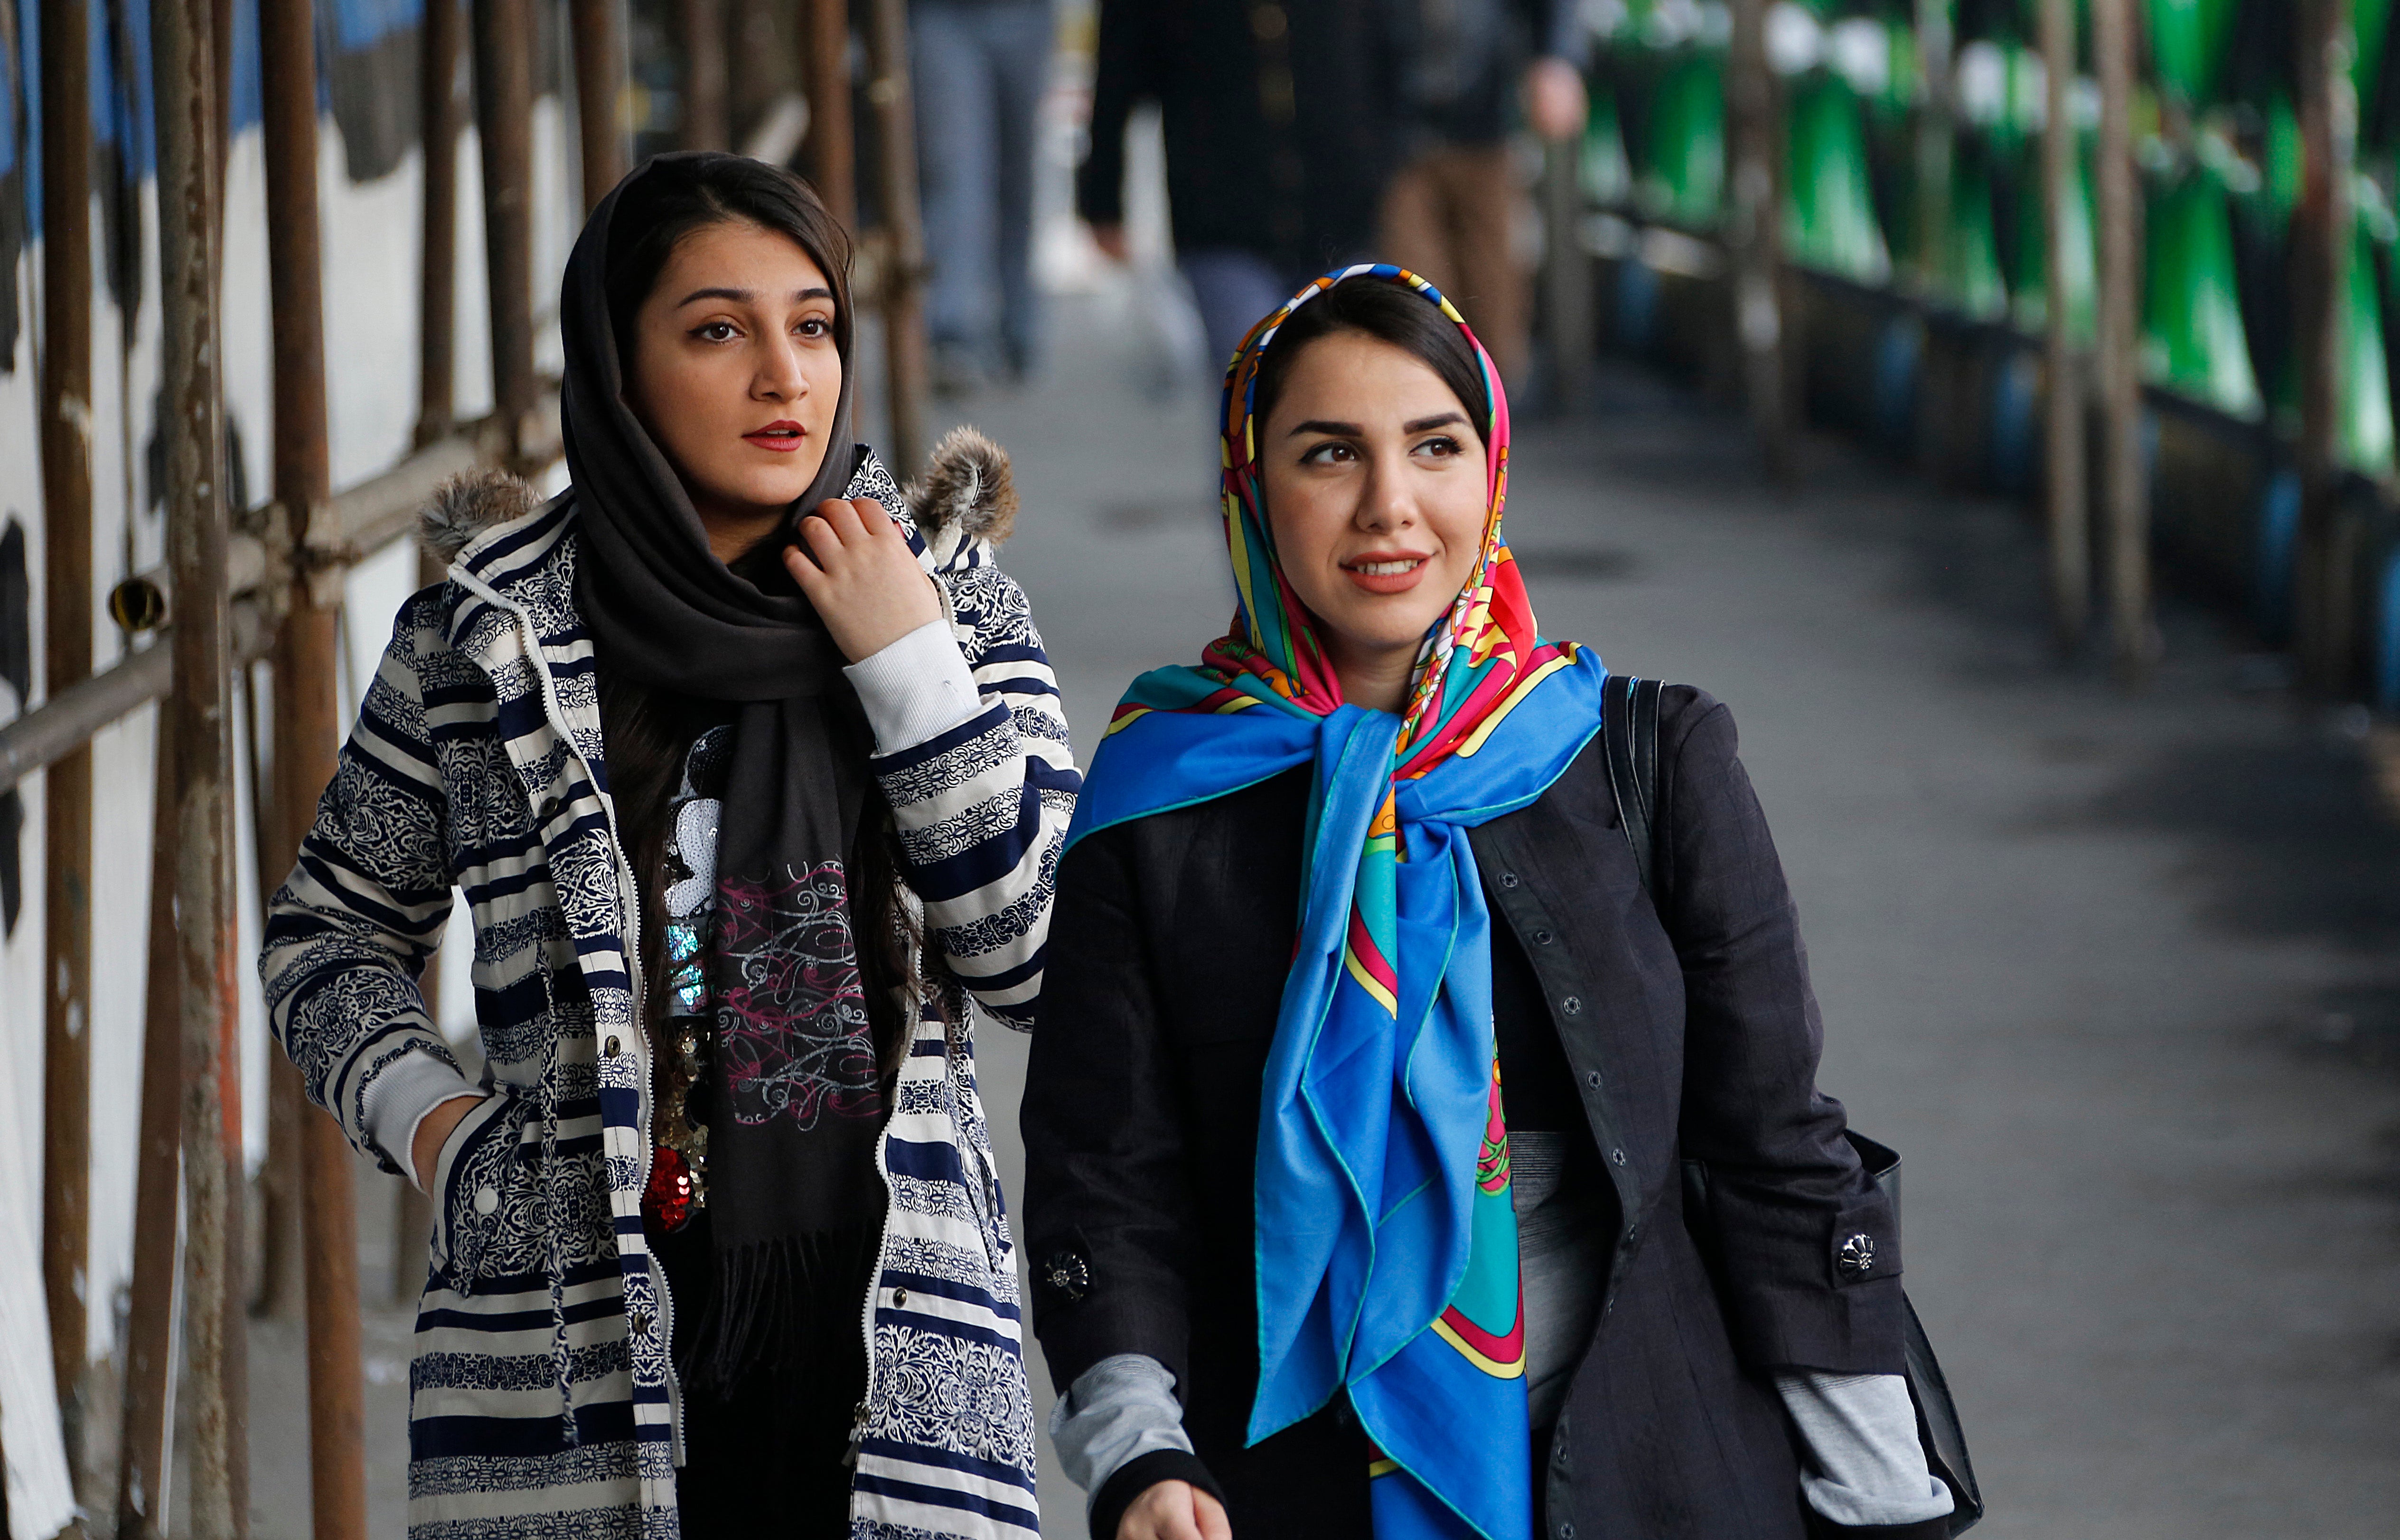 Iranian women removing headscarves to protest mandatory hijab laws The Independent